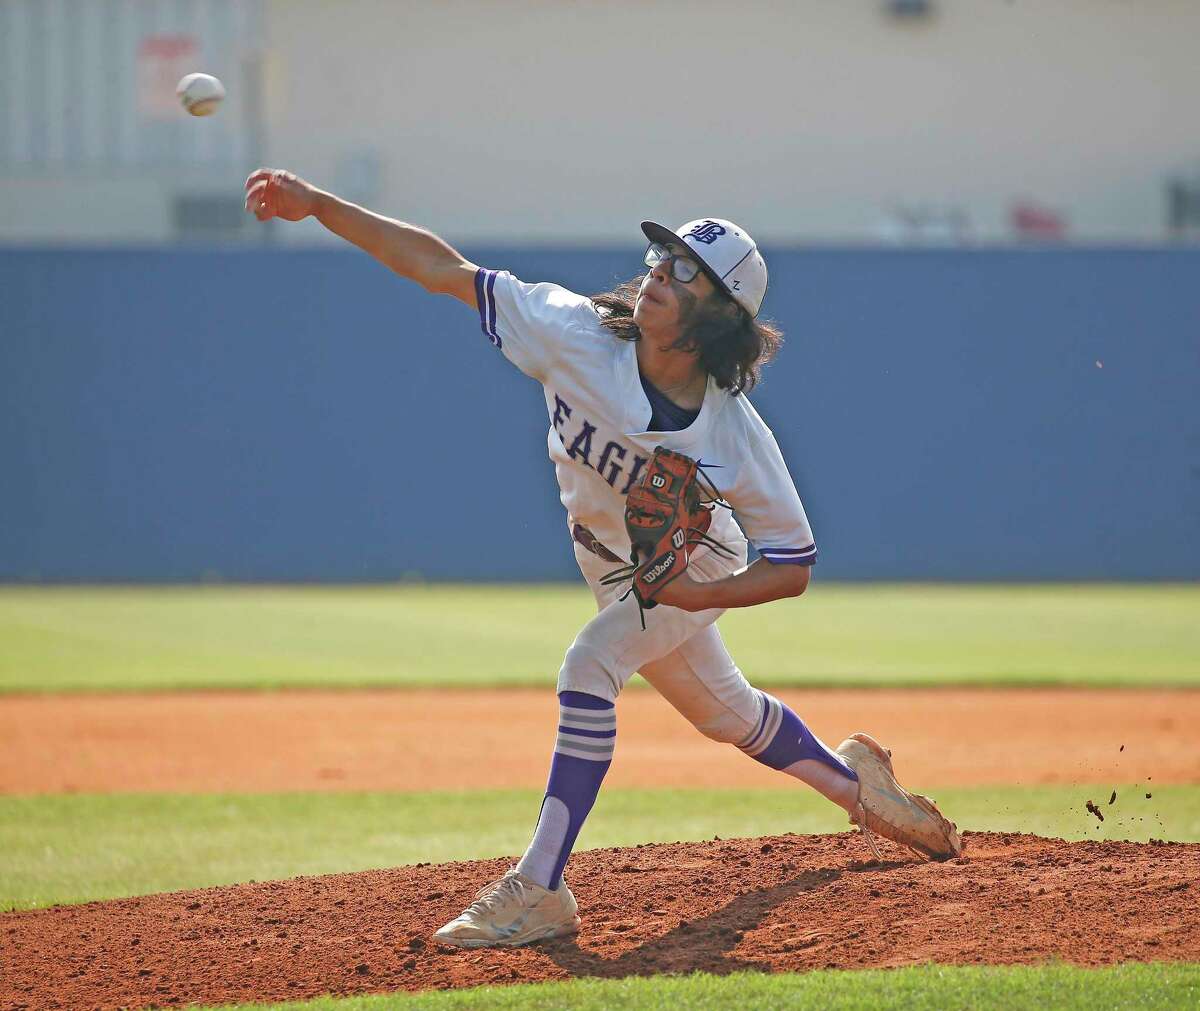 Brack winning pitcher Hector Quiroga (11) delivers a pitch In game 2 Class 5A baseball first-round playoff Brack defeated Medina Valley 8-1 forcing a third game on Saturday, May, 7, 2022 at SAISD Sports Complex